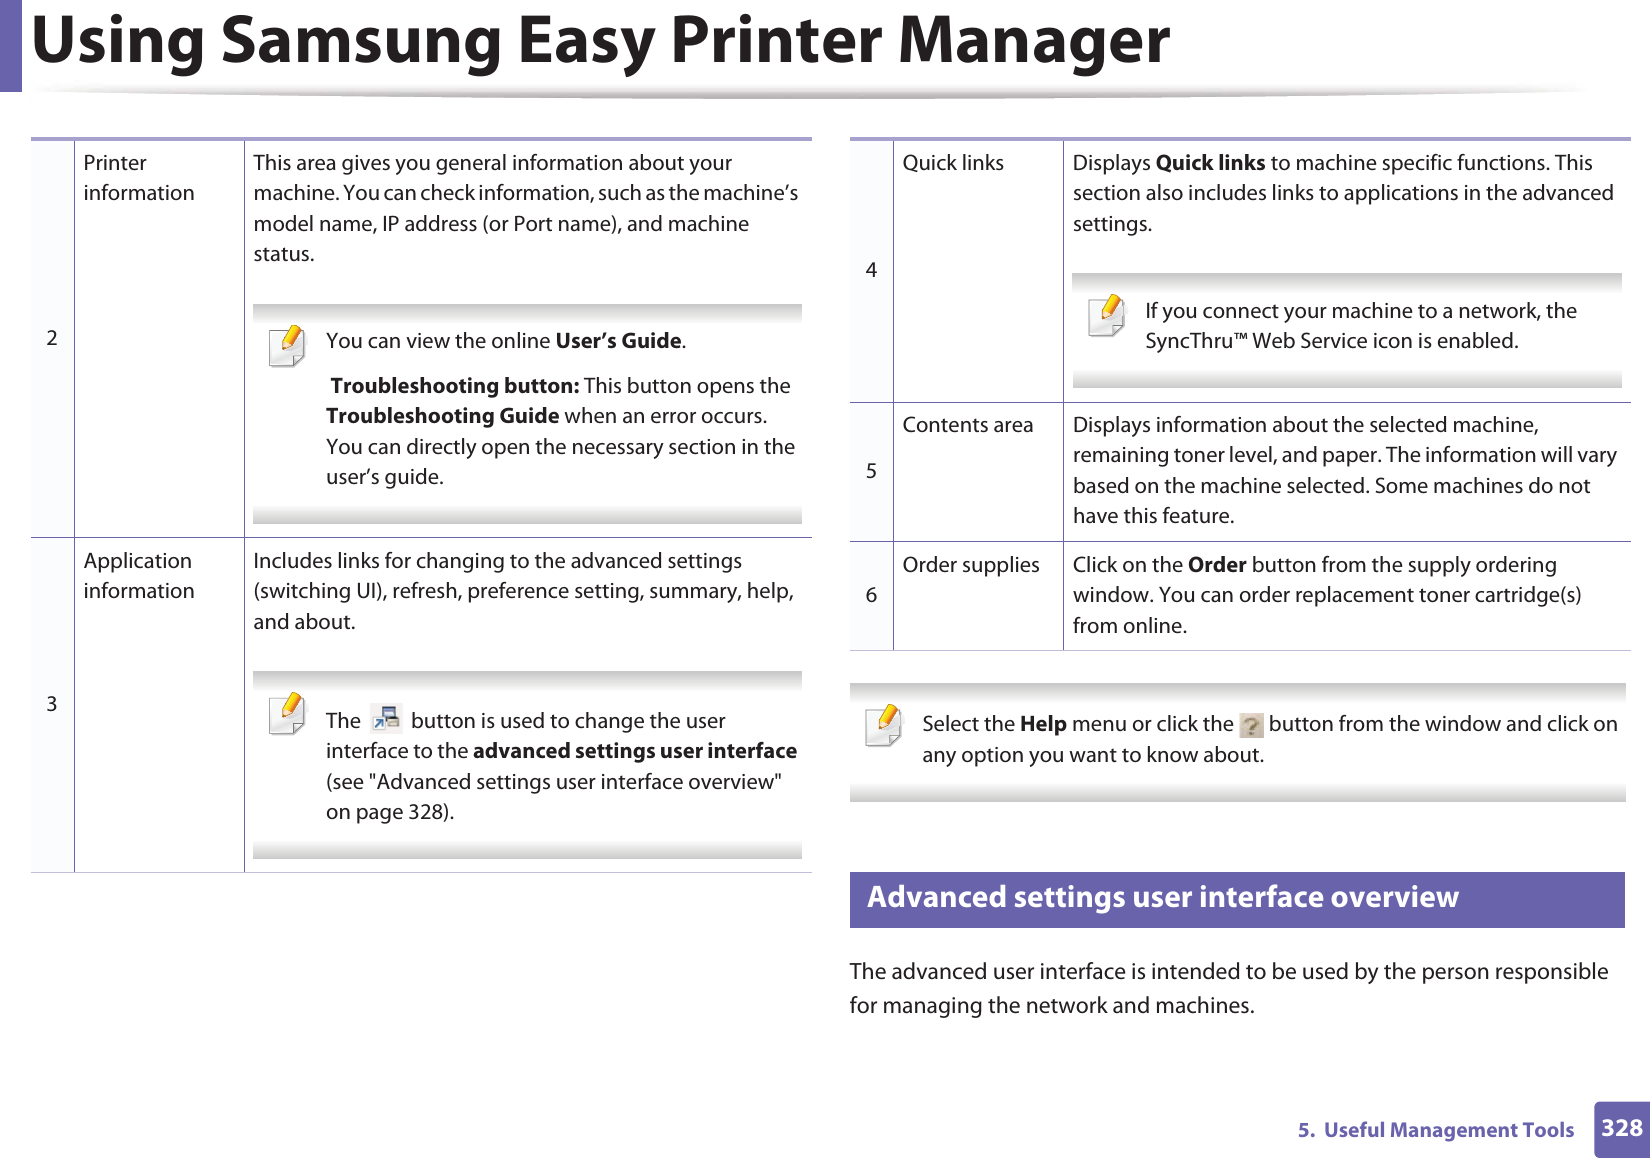 Using Samsung Easy Printer Manager3285.  Useful Management Tools Select the Help menu or click the   button from the window and click on any option you want to know about.  9 Advanced settings user interface overviewThe advanced user interface is intended to be used by the person responsible for managing the network and machines.2Printer informationThis area gives you general information about your machine. You can check information, such as the machine’s model name, IP address (or Port name), and machine status. You can view the online User’s Guide. Troubleshooting button: This button opens the Troubleshooting Guide when an error occurs. You can directly open the necessary section in the user’s guide.  3Application informationIncludes links for changing to the advanced settings (switching UI), refresh, preference setting, summary, help, and about. The   button is used to change the user interface to the advanced settings user interface (see &quot;Advanced settings user interface overview&quot; on page 328). 4Quick links Displays Quick links to machine specific functions. This section also includes links to applications in the advanced settings. If you connect your machine to a network, the SyncThru™ Web Service icon is enabled. 5Contents area Displays information about the selected machine, remaining toner level, and paper. The information will vary based on the machine selected. Some machines do not have this feature.6Order supplies Click on the Order button from the supply ordering window. You can order replacement toner cartridge(s) from online.